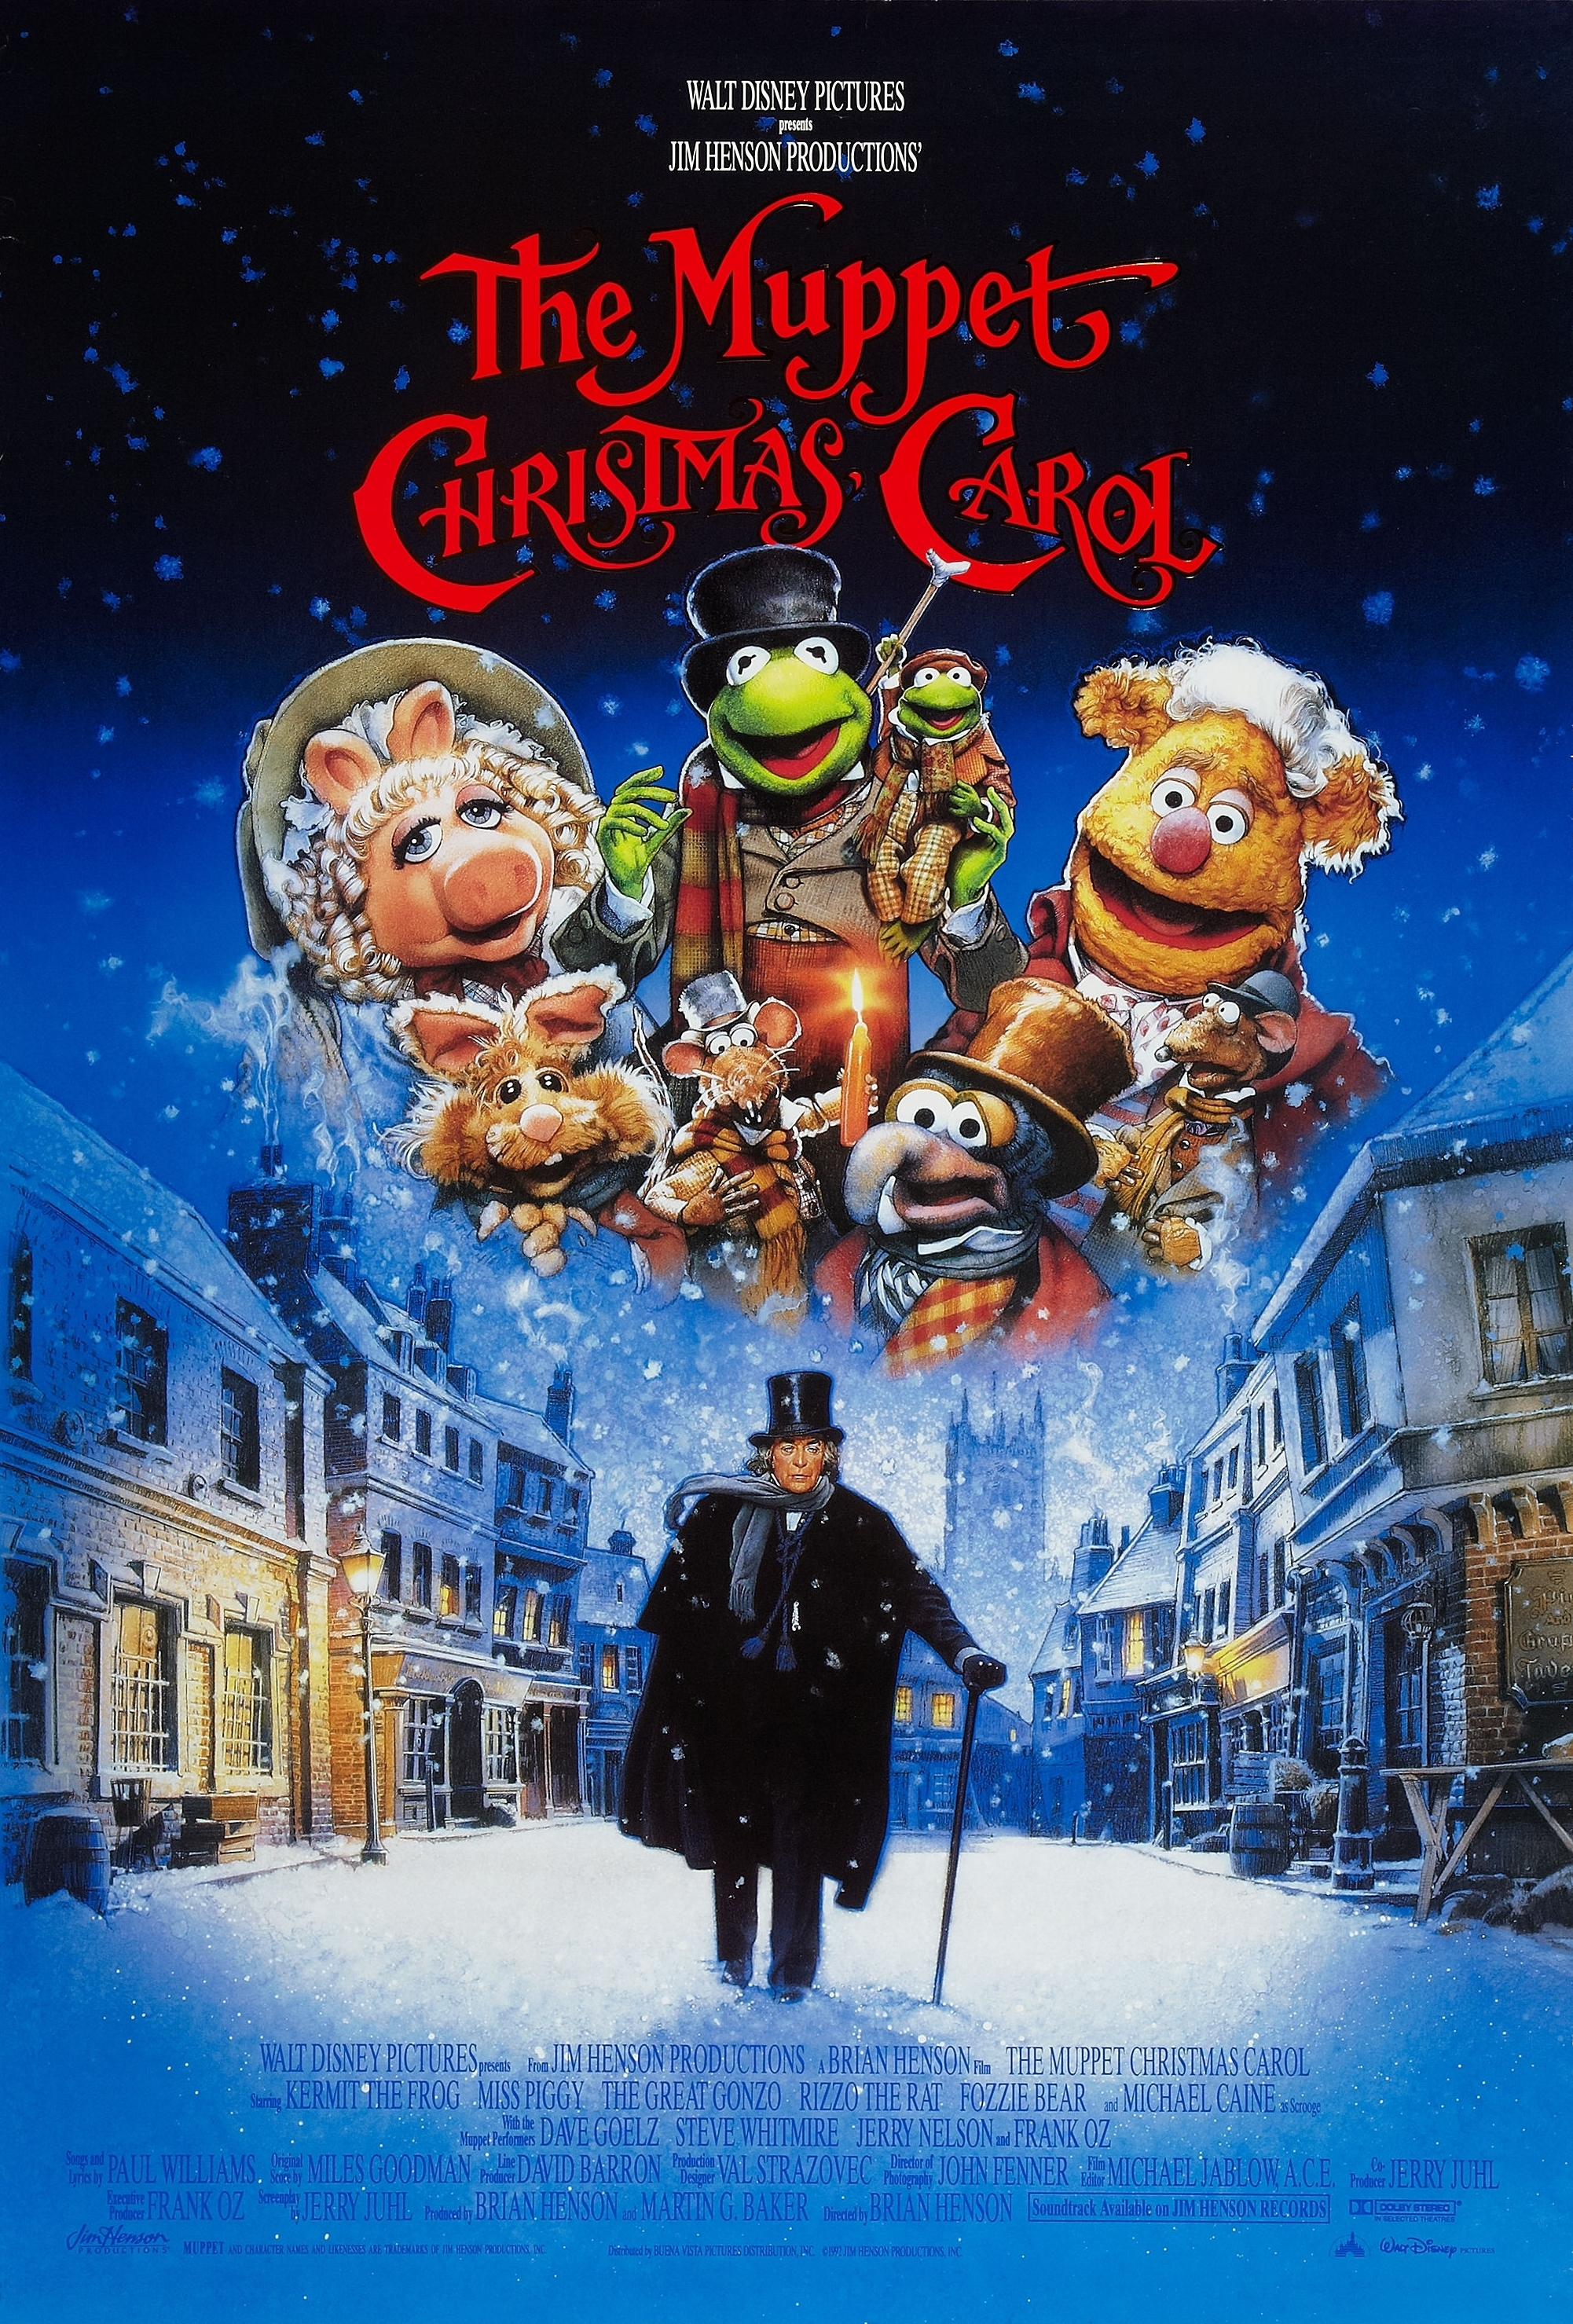 Best classic christmas movies - The Muppet Christmas Carol